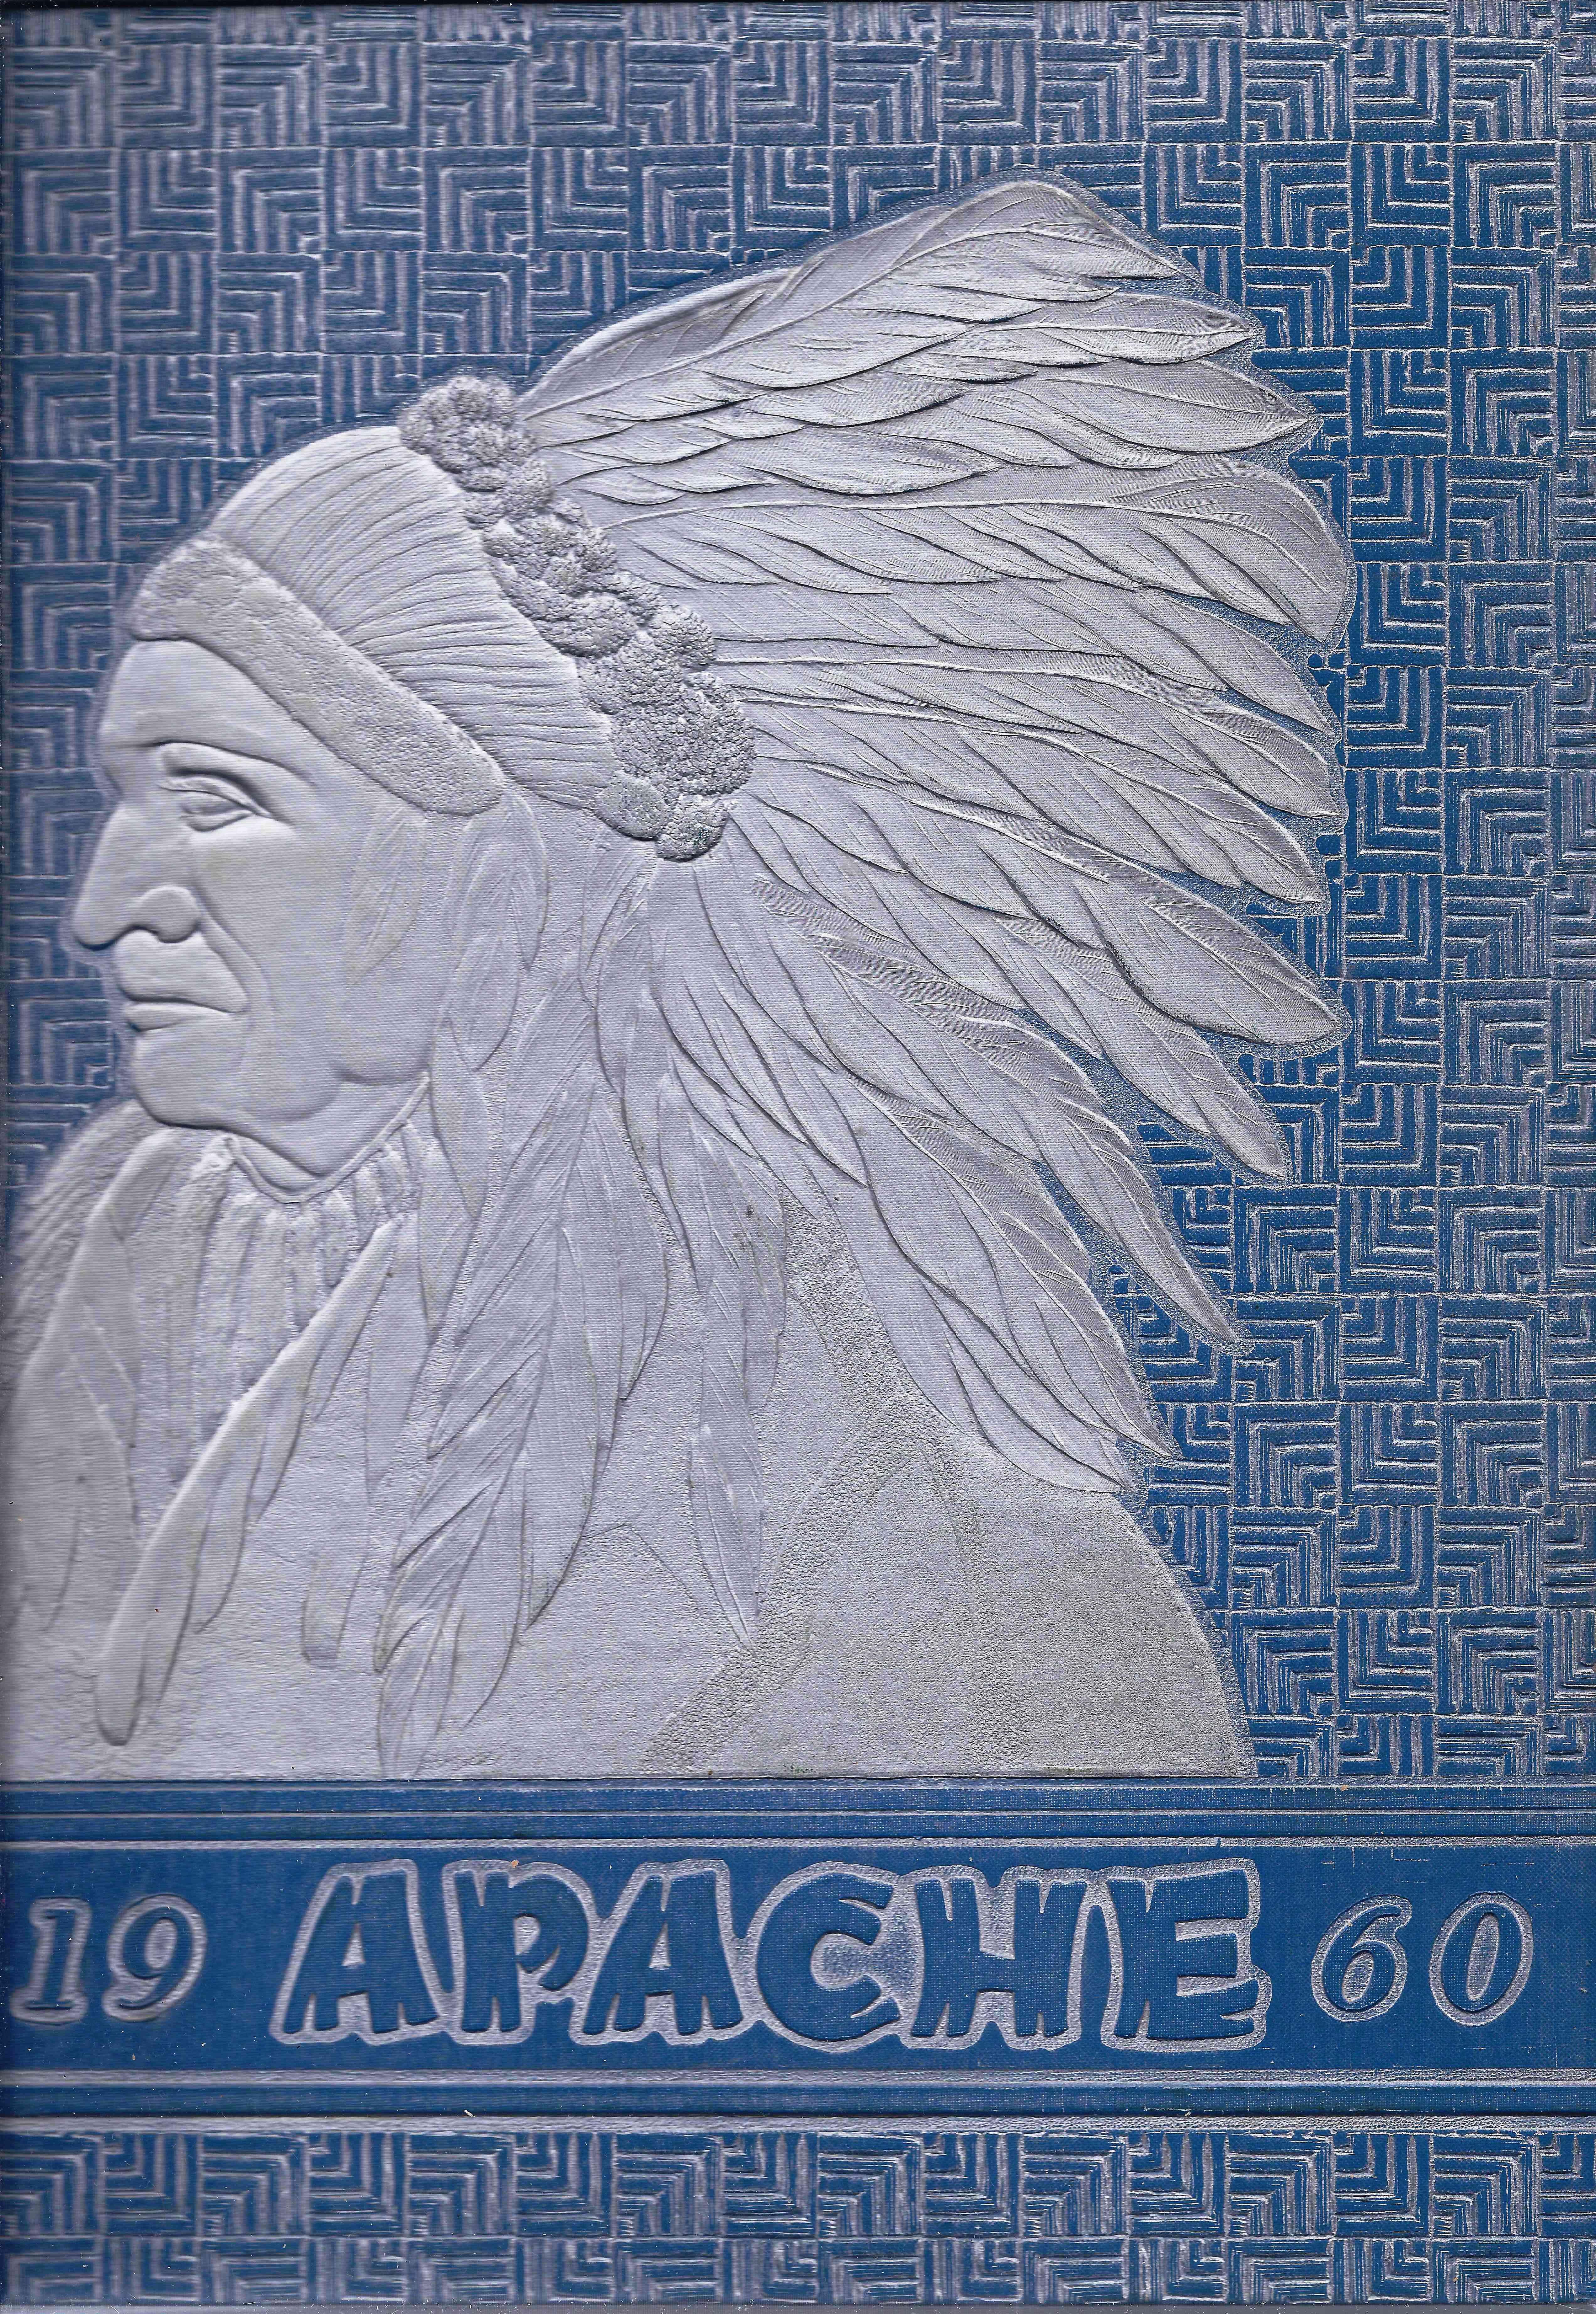 1960 for Tyler Junior College Apache Annual Yearbook , Tyler, Smith County, Texas.